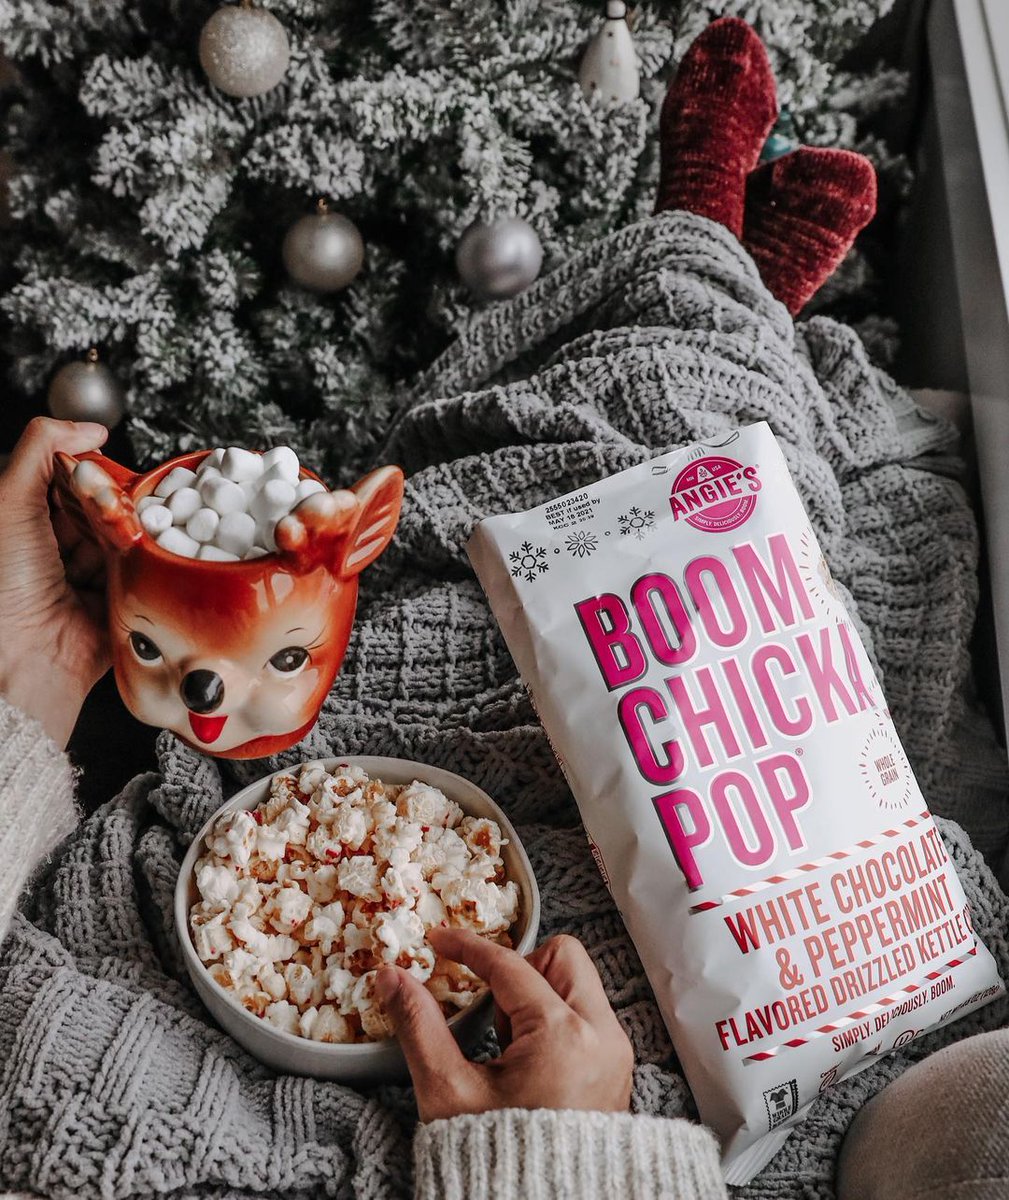 Who else is still watching Christmas movies on repeat? 🎄 We're putting on our fuzzy socks, drinking hot cocoa, and snuggling with our favorite bag of White Chocolate & Peppermint popcorn! ❄️ @greyslittlecloset